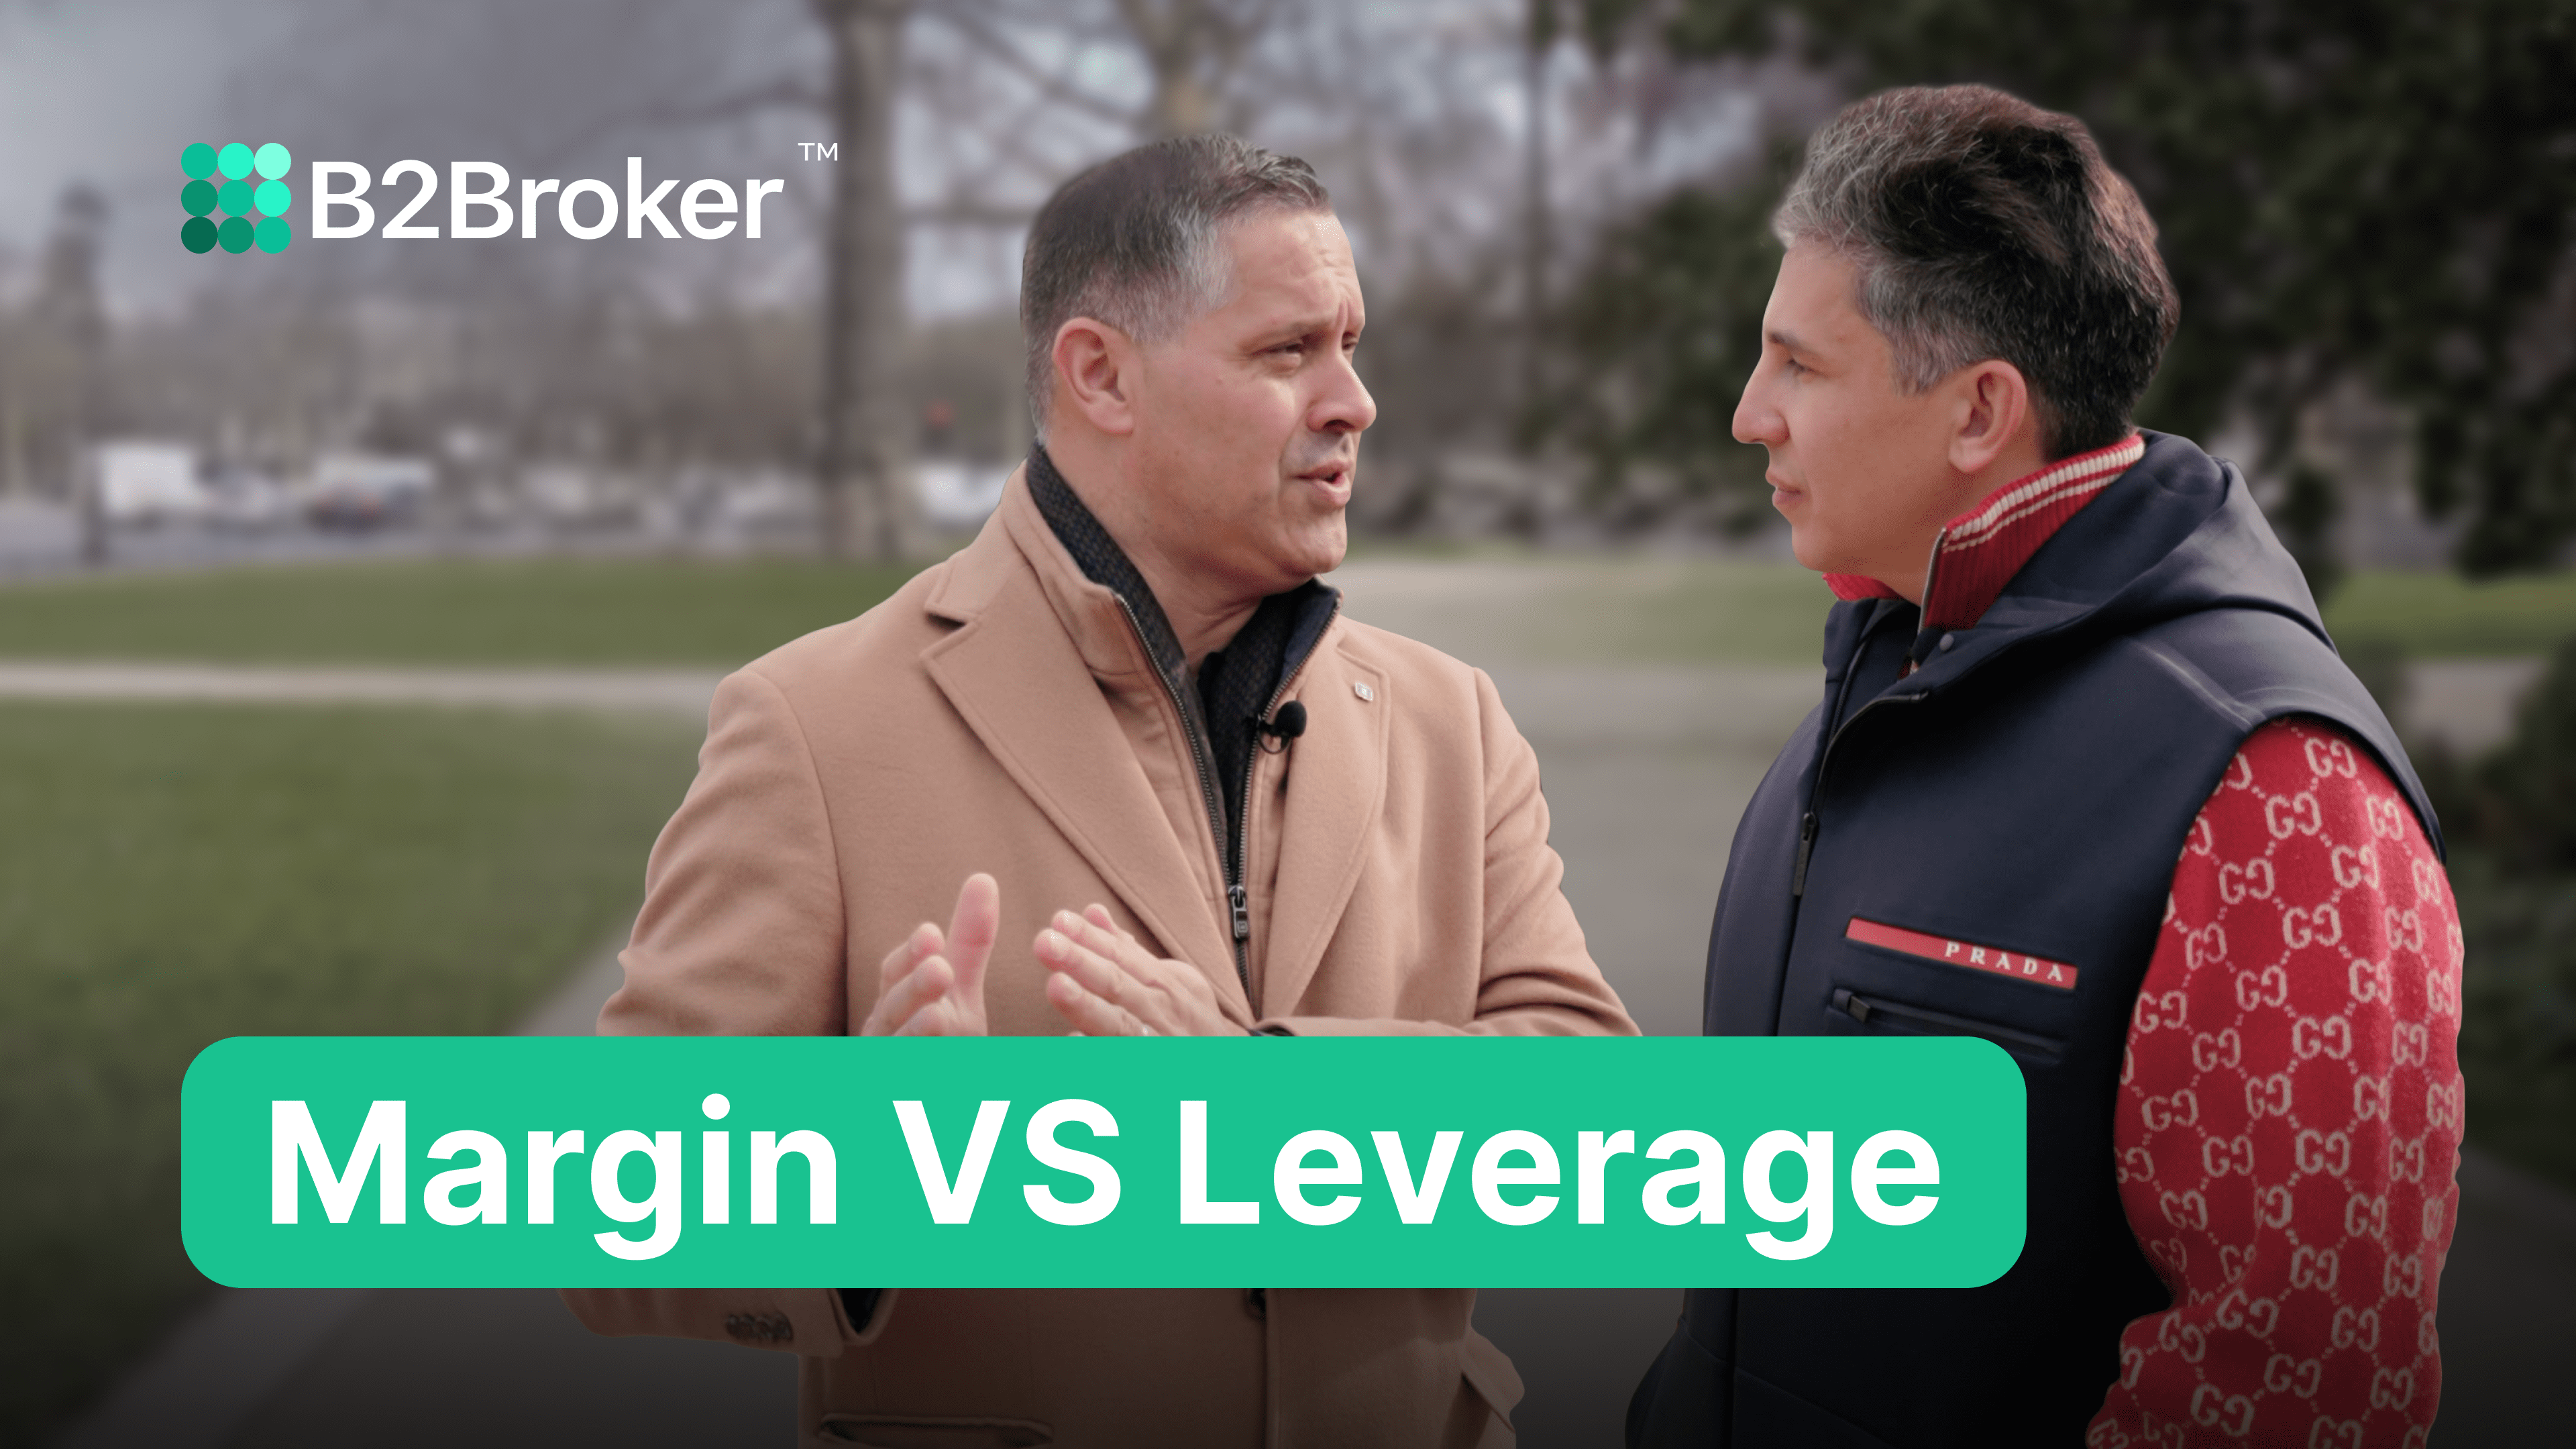 B2Broker Q&A | Leverage and Margin: What is the Difference?